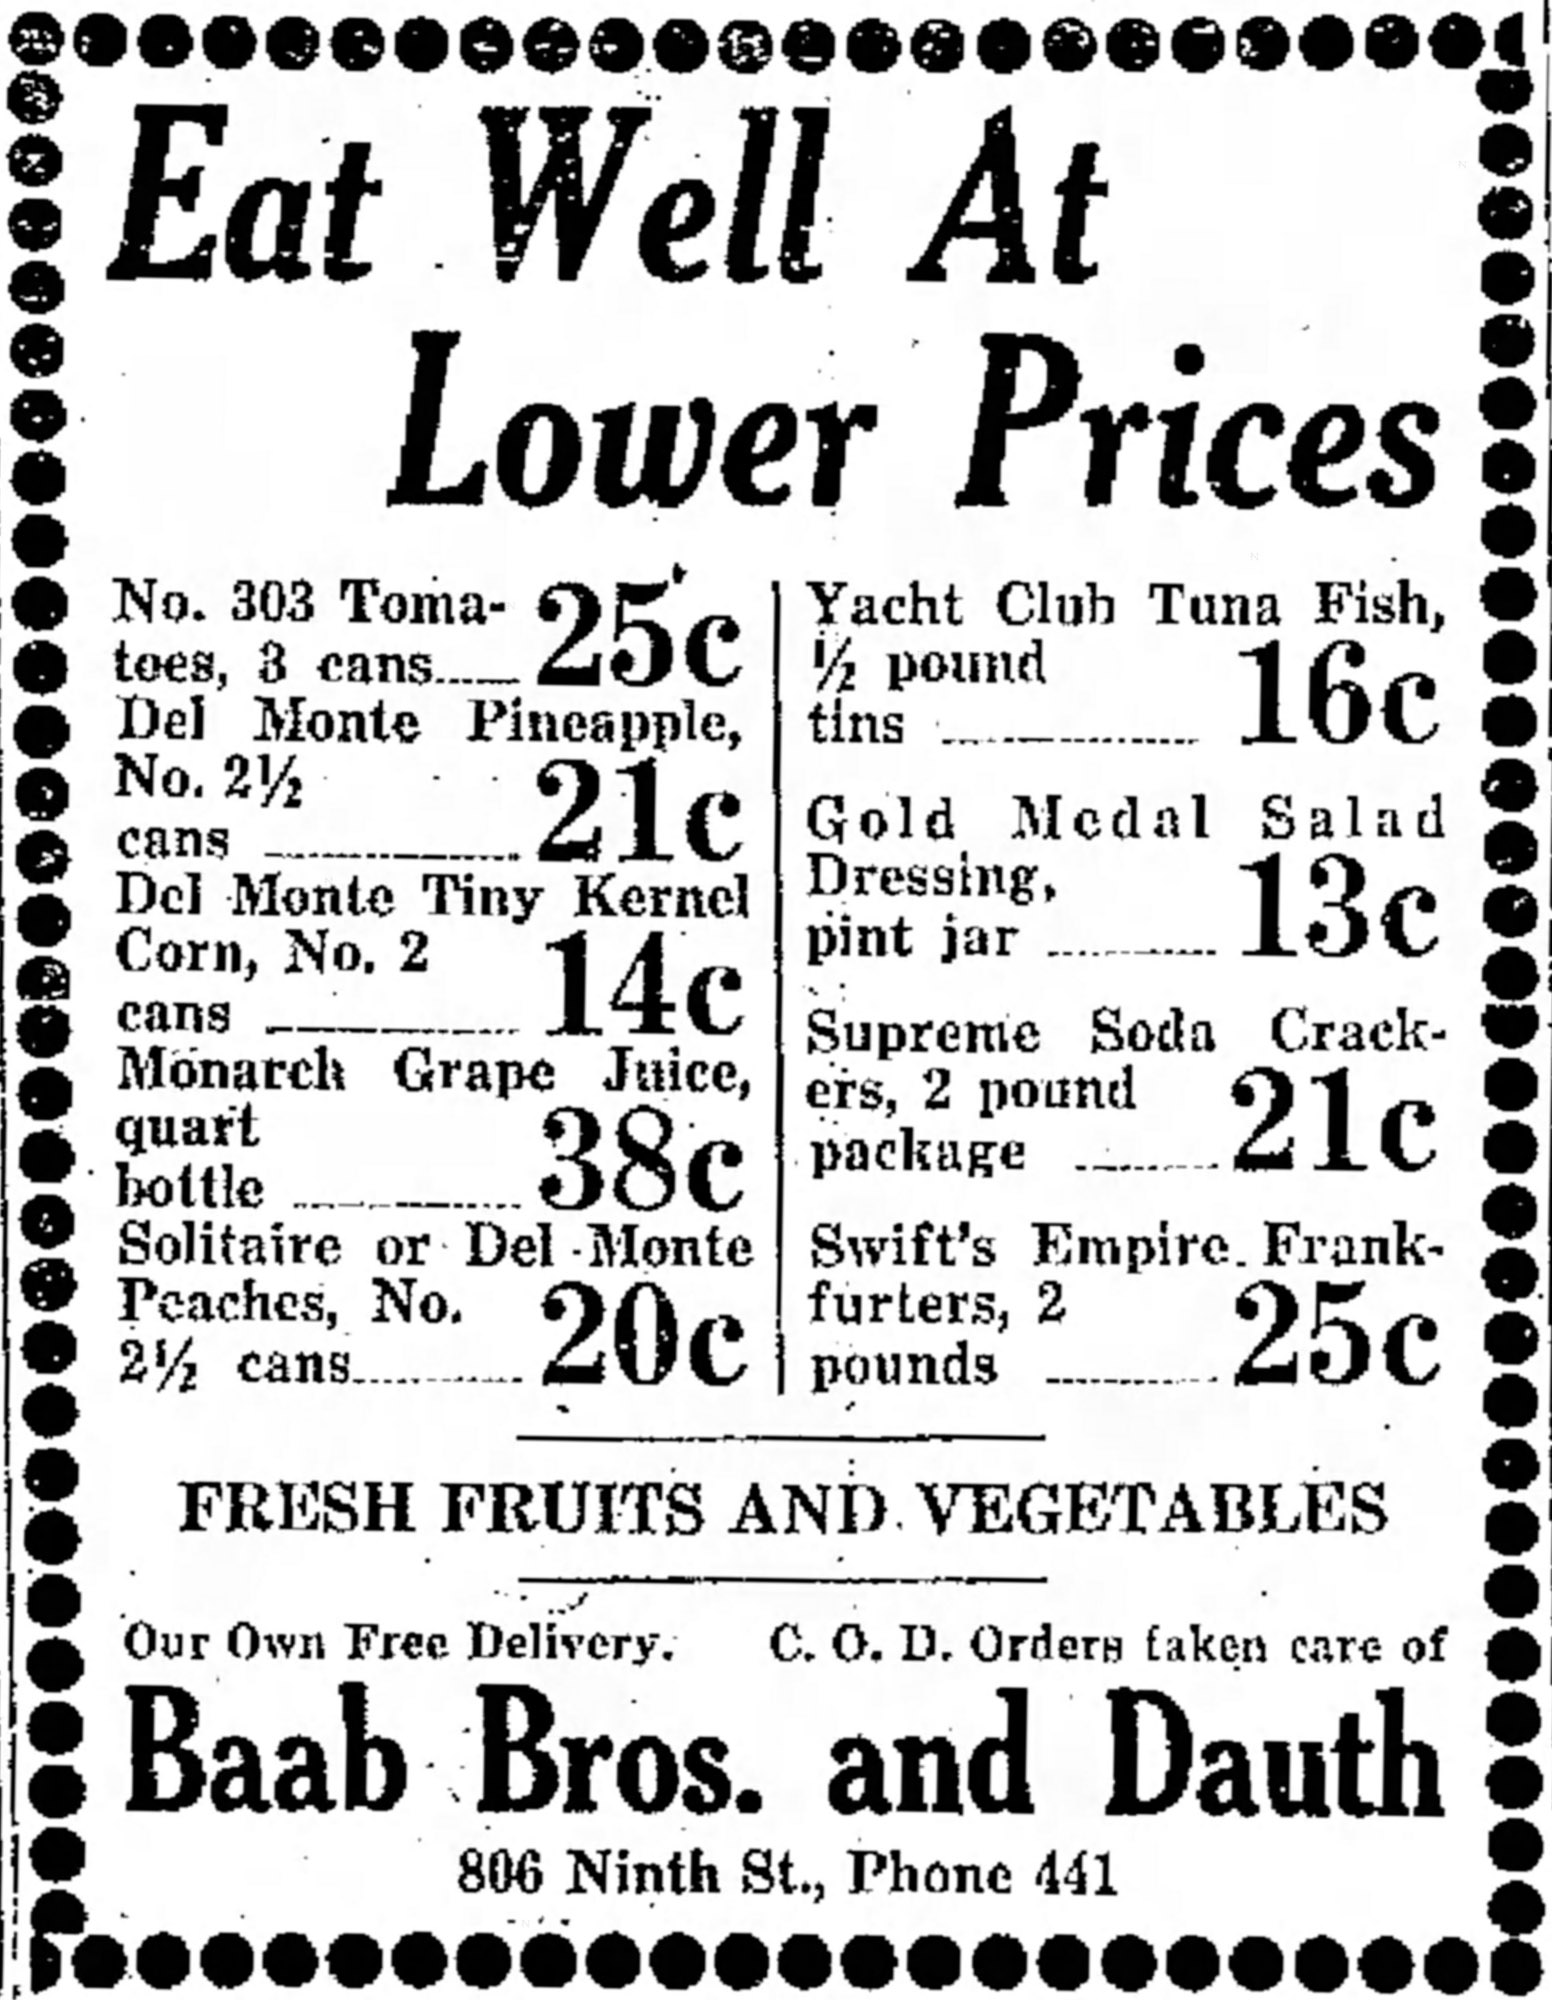 Dauth Family Archive - 1932-07-07 - Greeley Daily Tribune - Baab Bros and Dauth Advertisement